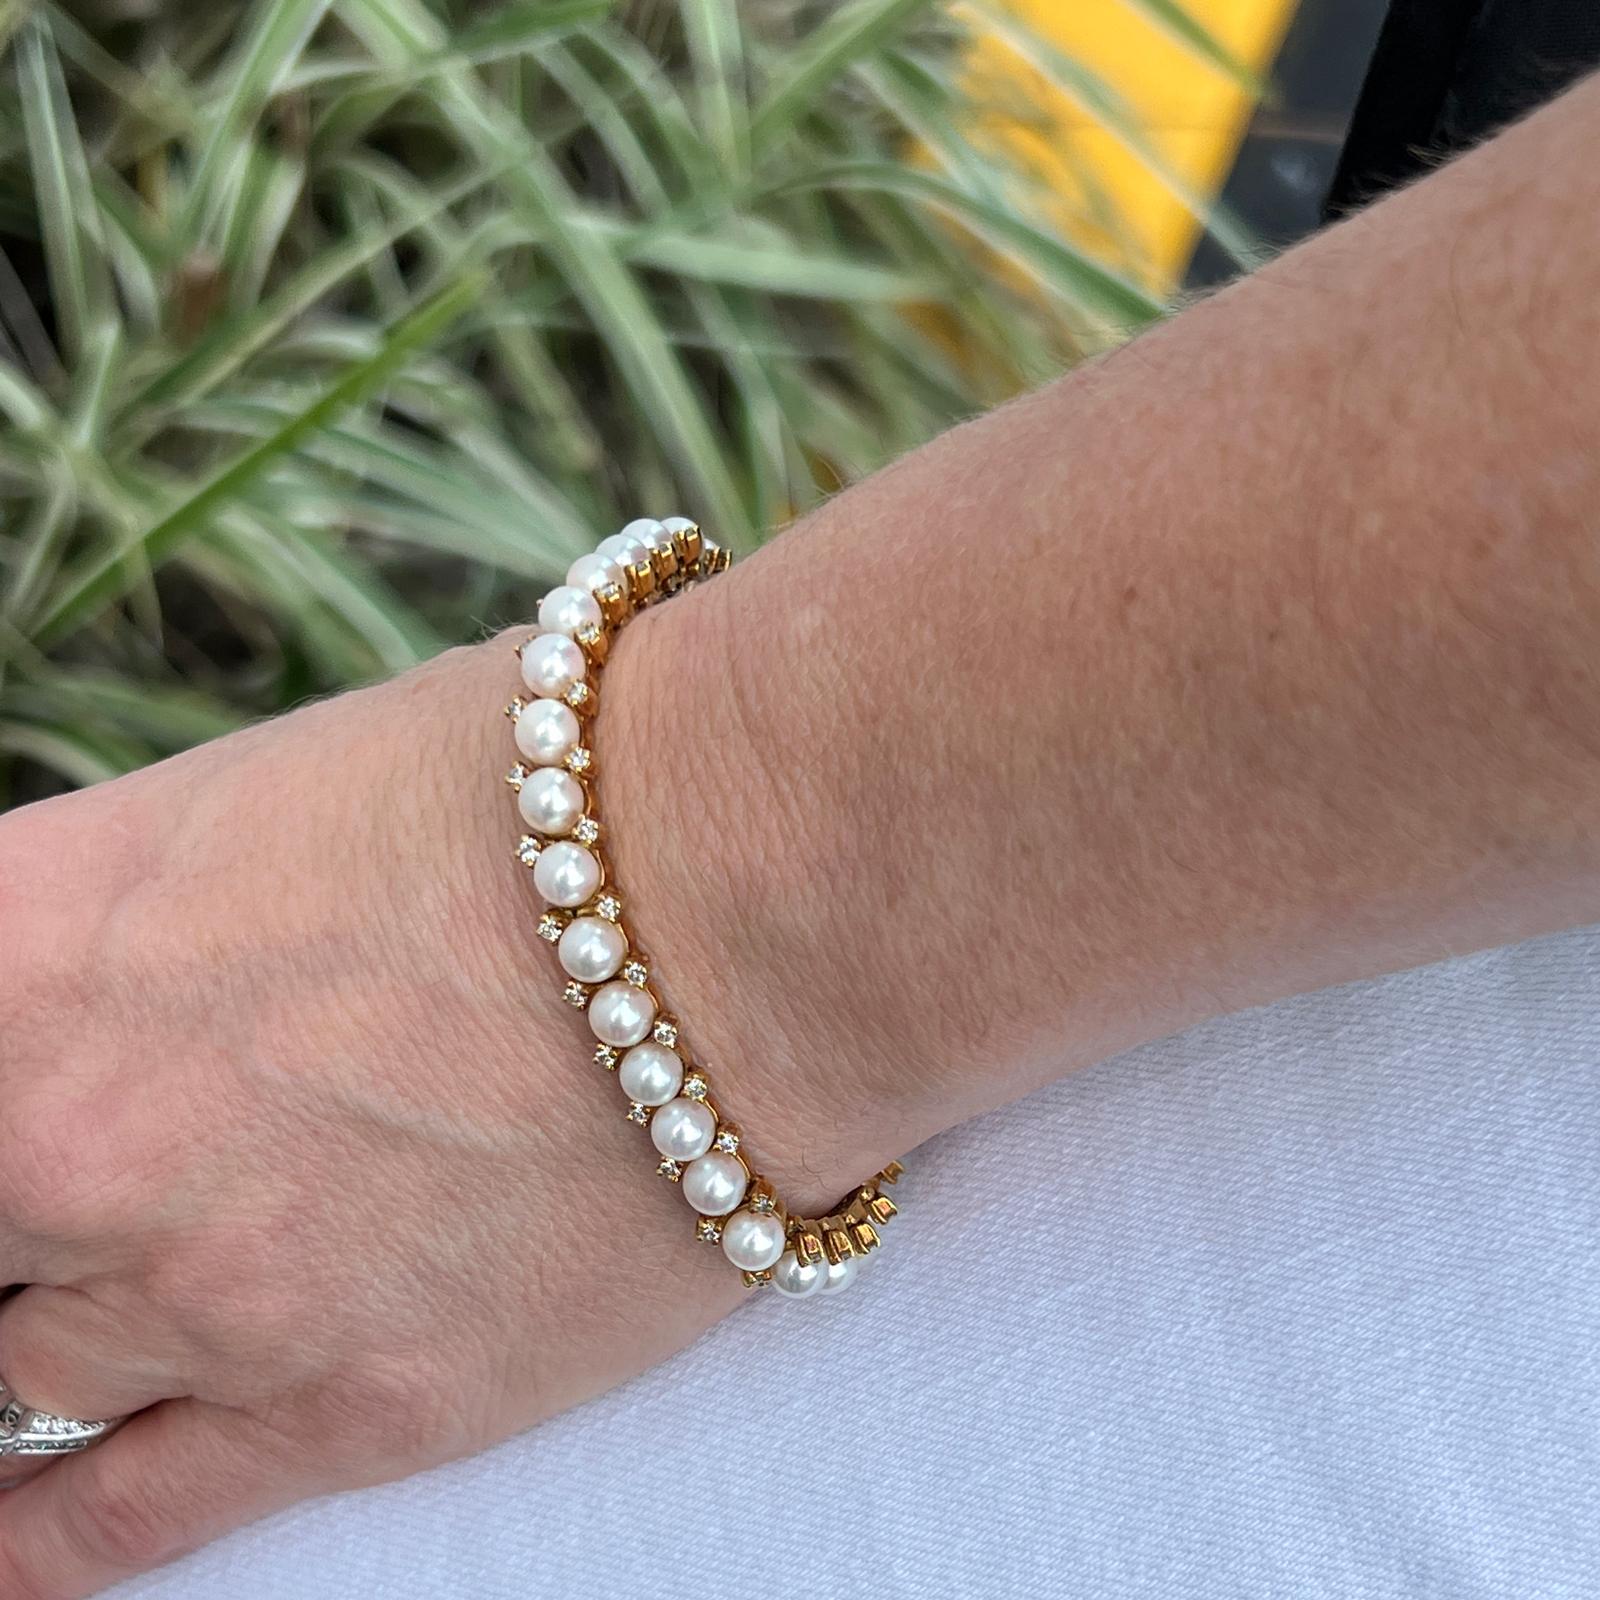 Timeless diamond and pearl link bracelet fashioned in 18 karat yellow gold. The bracelet features 5.5mm pearls and 64 round briliant cut diamonds weighing approximately 2.50 carat total weight. The diamonds are graded H-I color and SI1 clarity. The